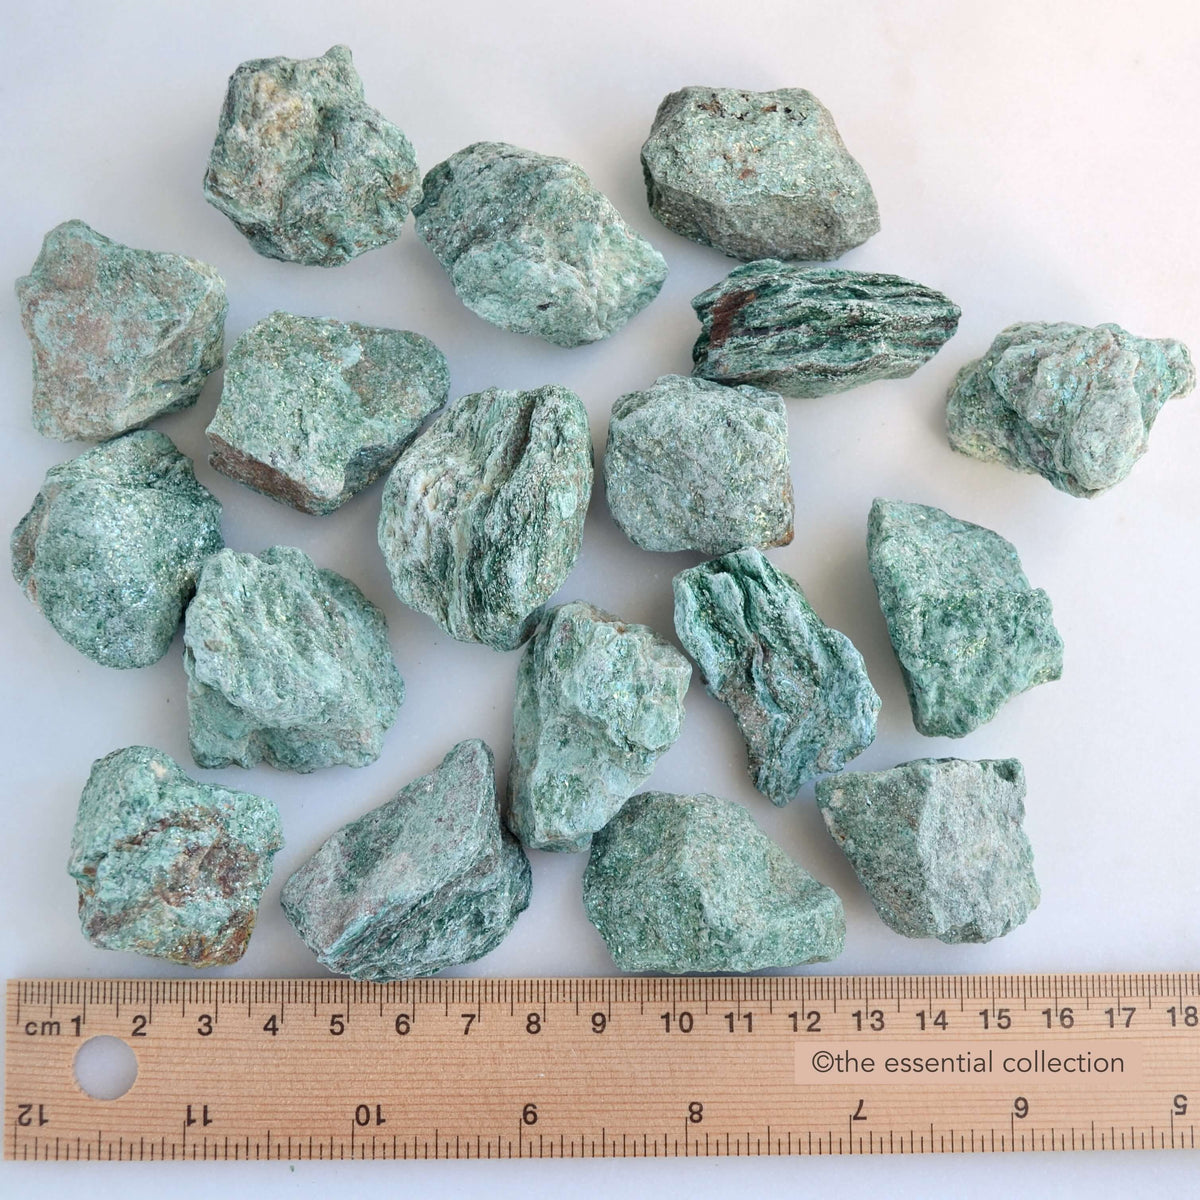 fuchsite raw crystals for sale